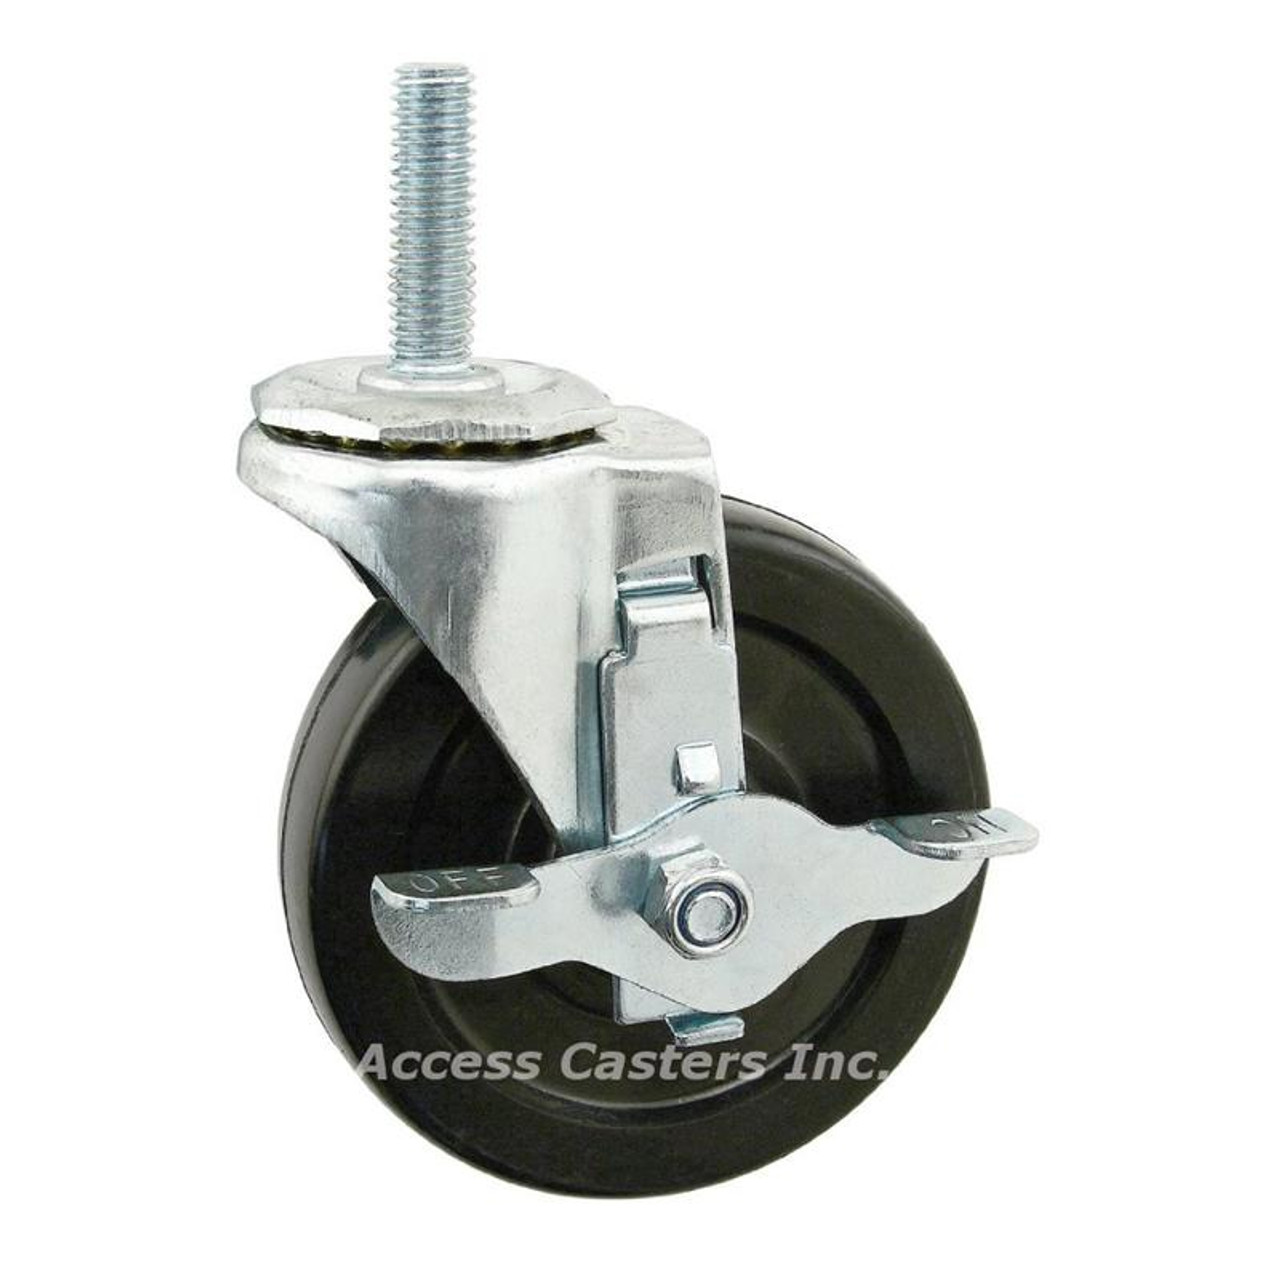 AC-2305 4" caster with brake, 2305